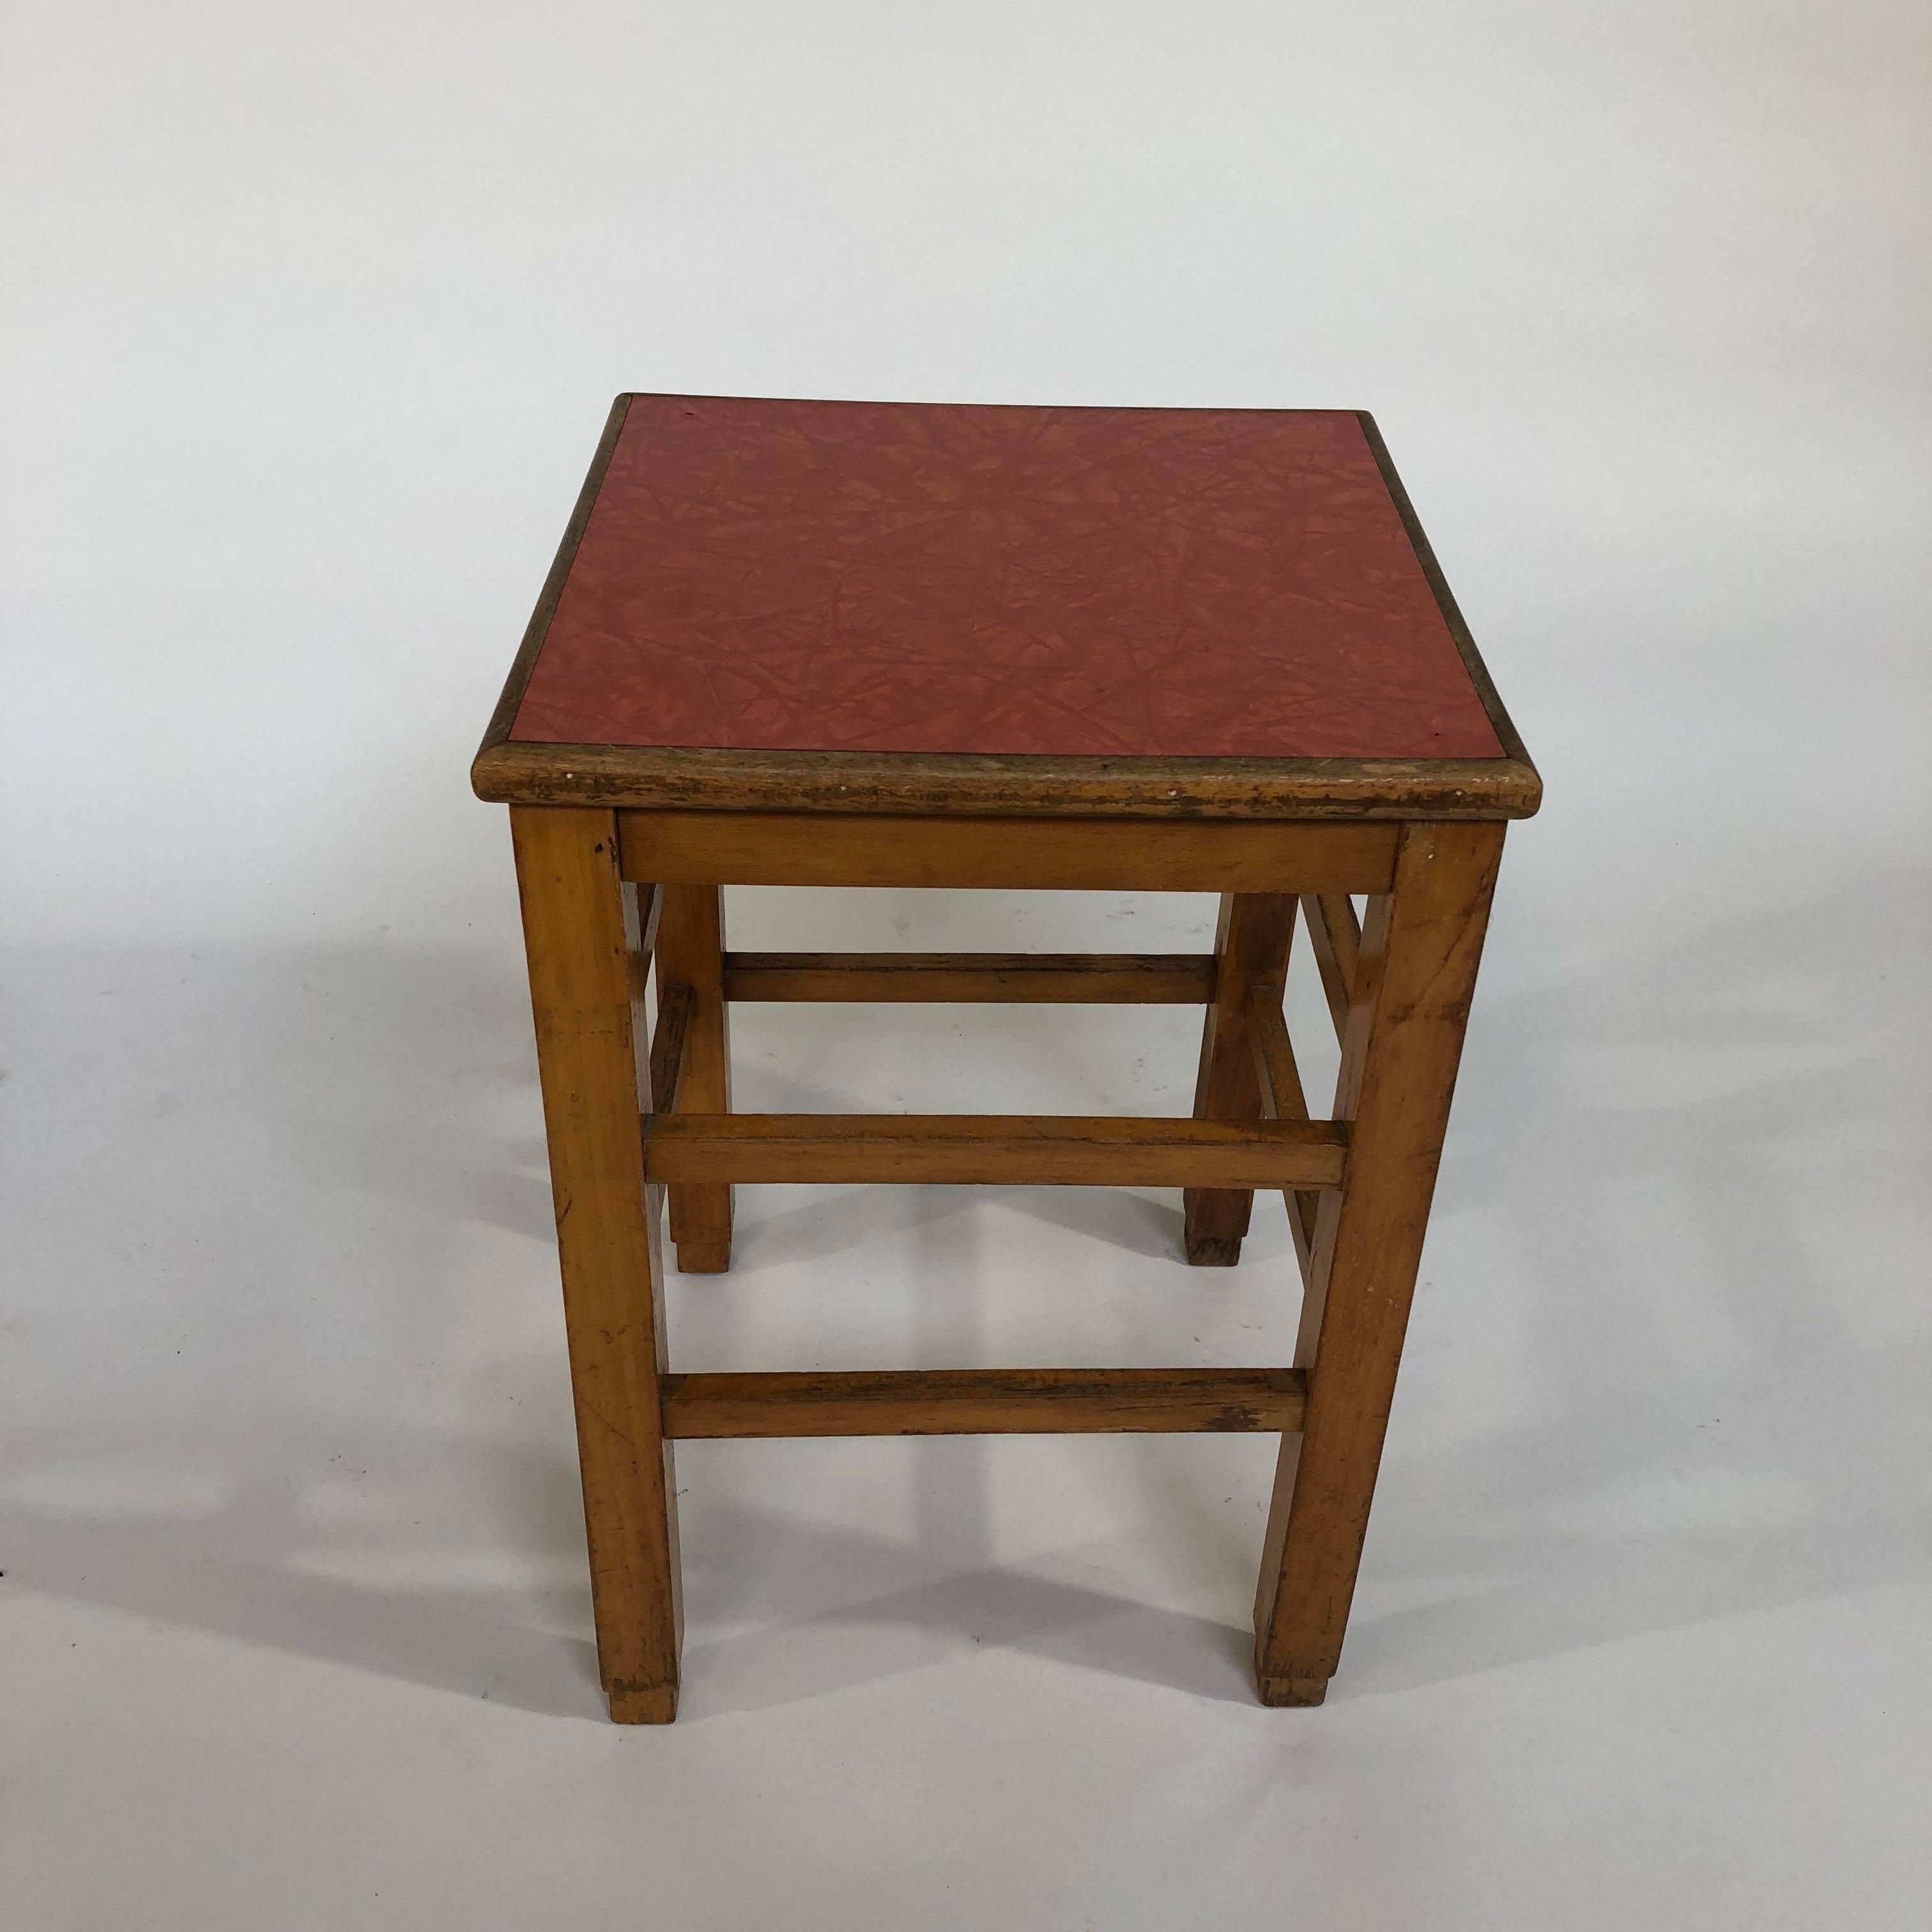 Unique 1940s Pine School Stools or Side Table In Fair Condition For Sale In Achterveld, NL